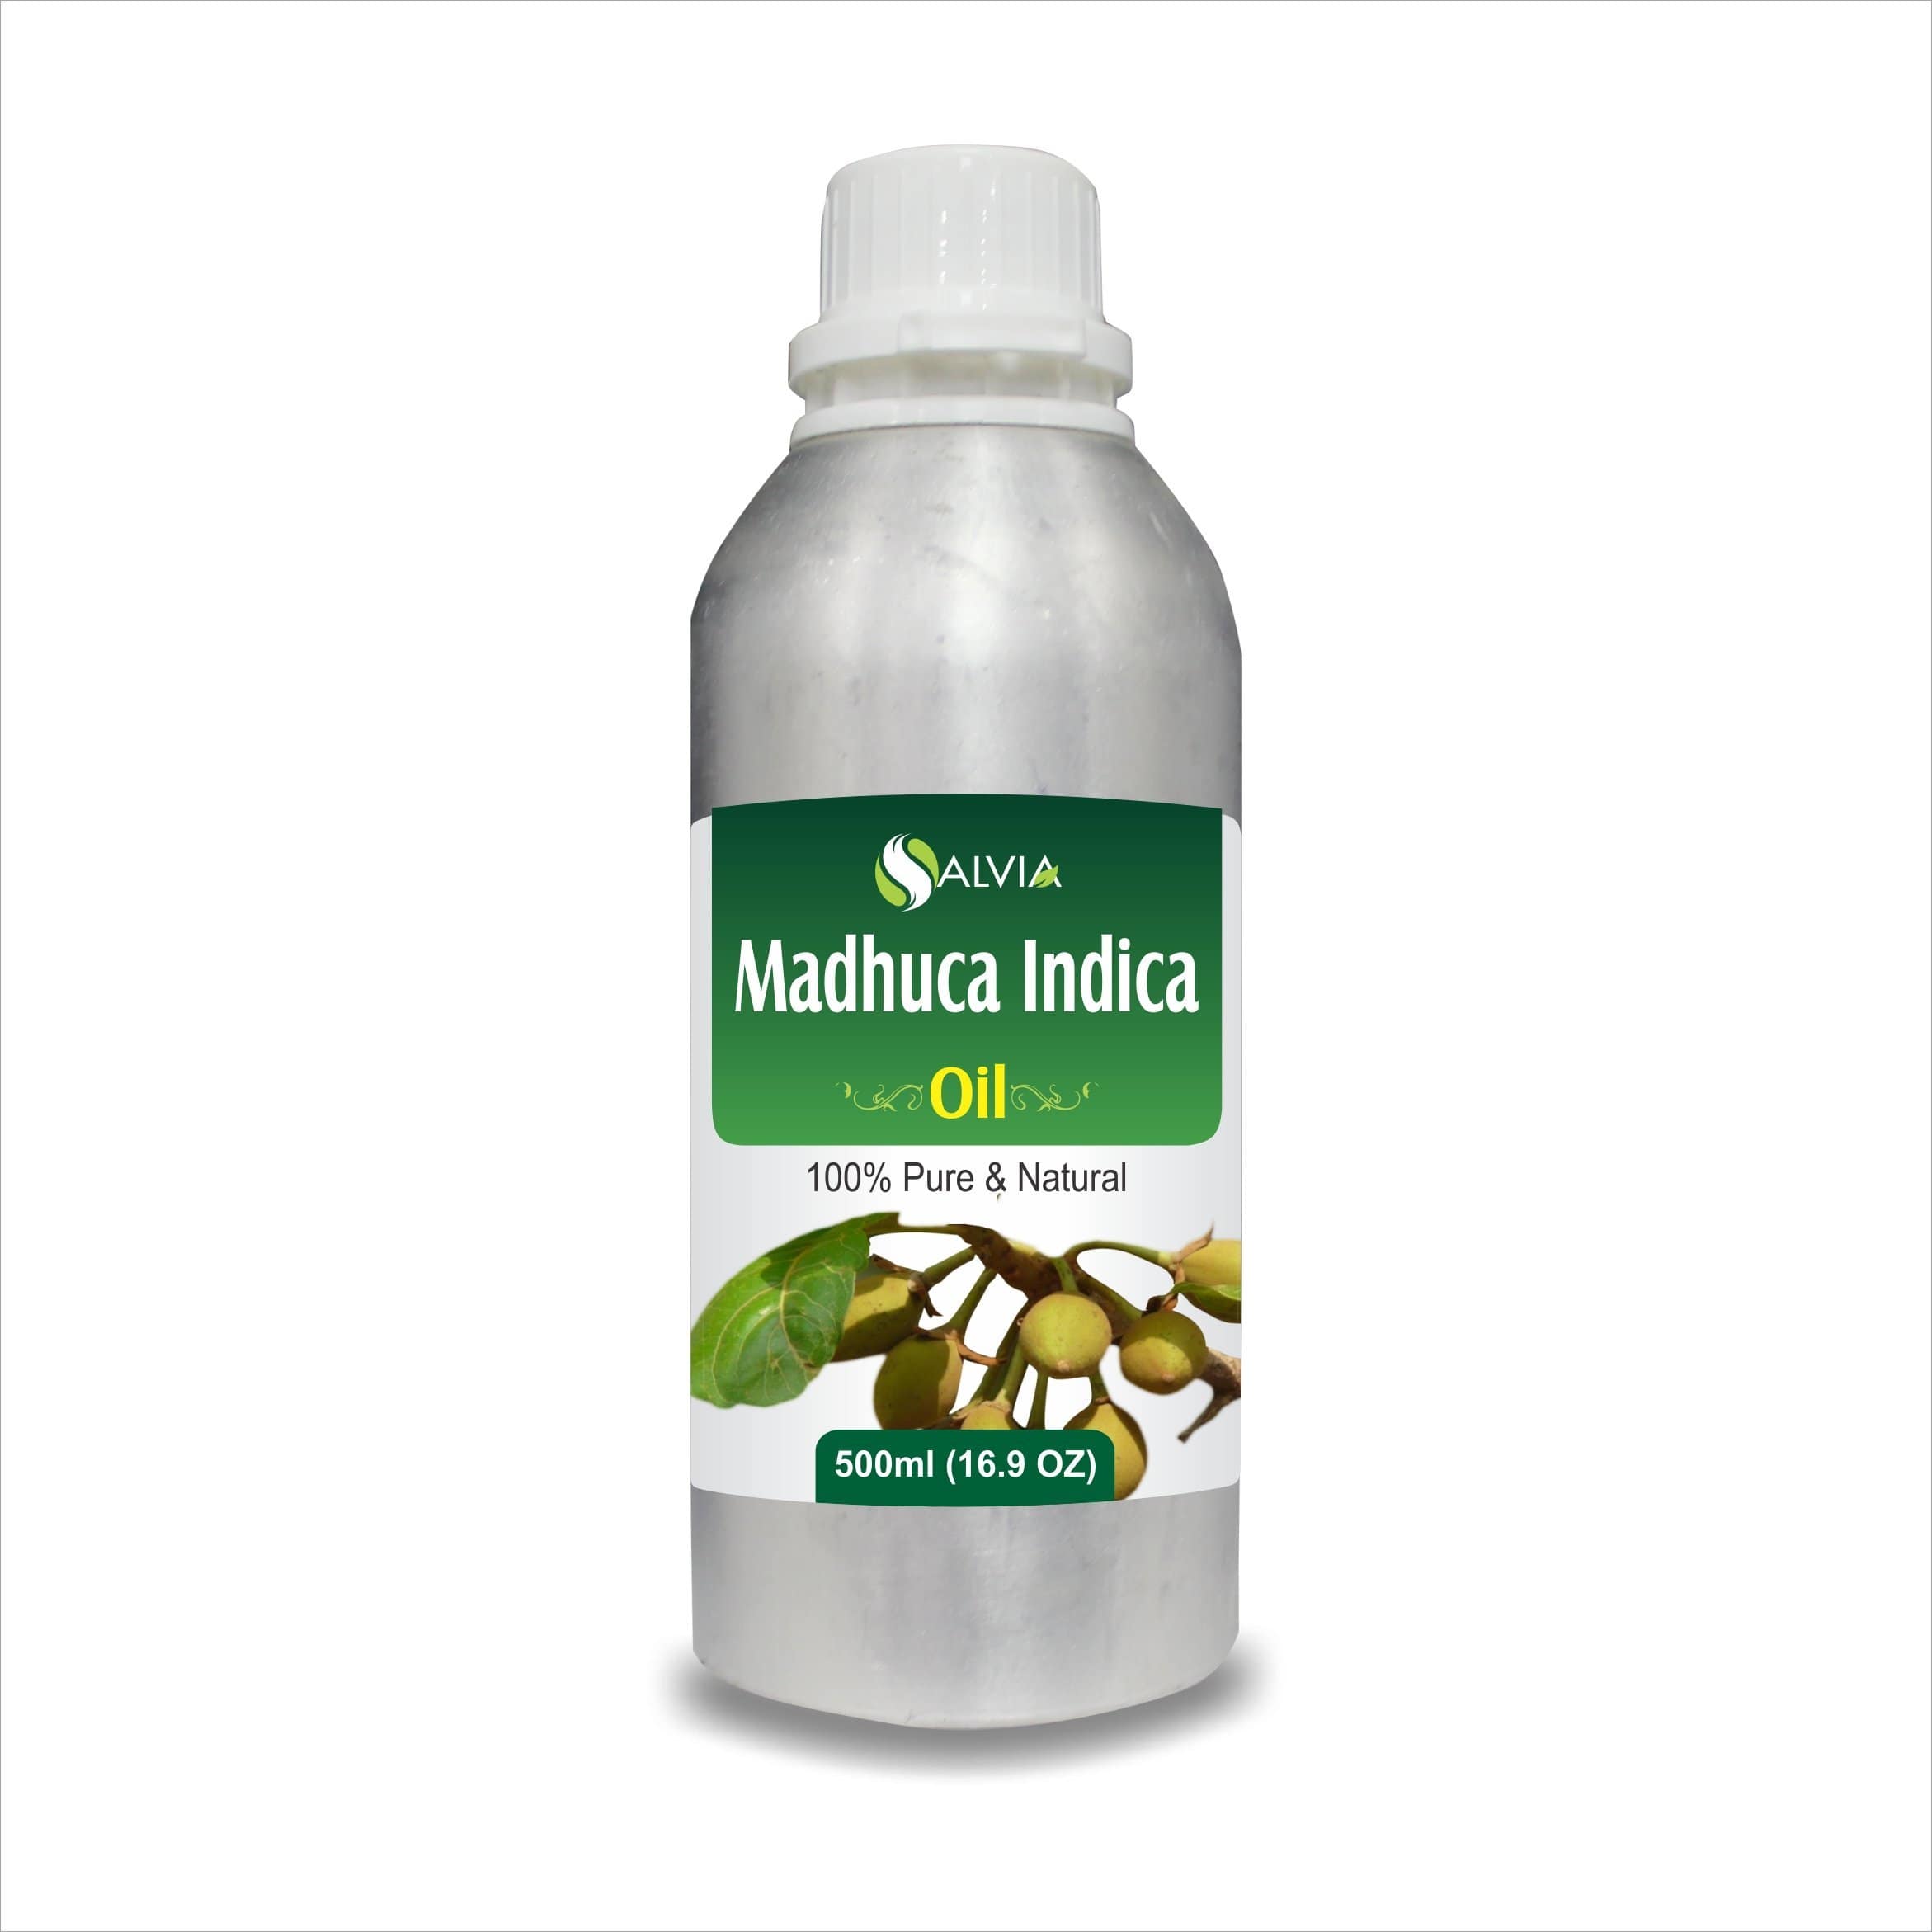 Salvia Natural Carrier Oils 500ml Madhuca Indica Oil (Bassia Latifolia) 100% Pure & Natural Carrier Oil Improves Skin Health, Mosquito Repellent, Reduces Joint Pain